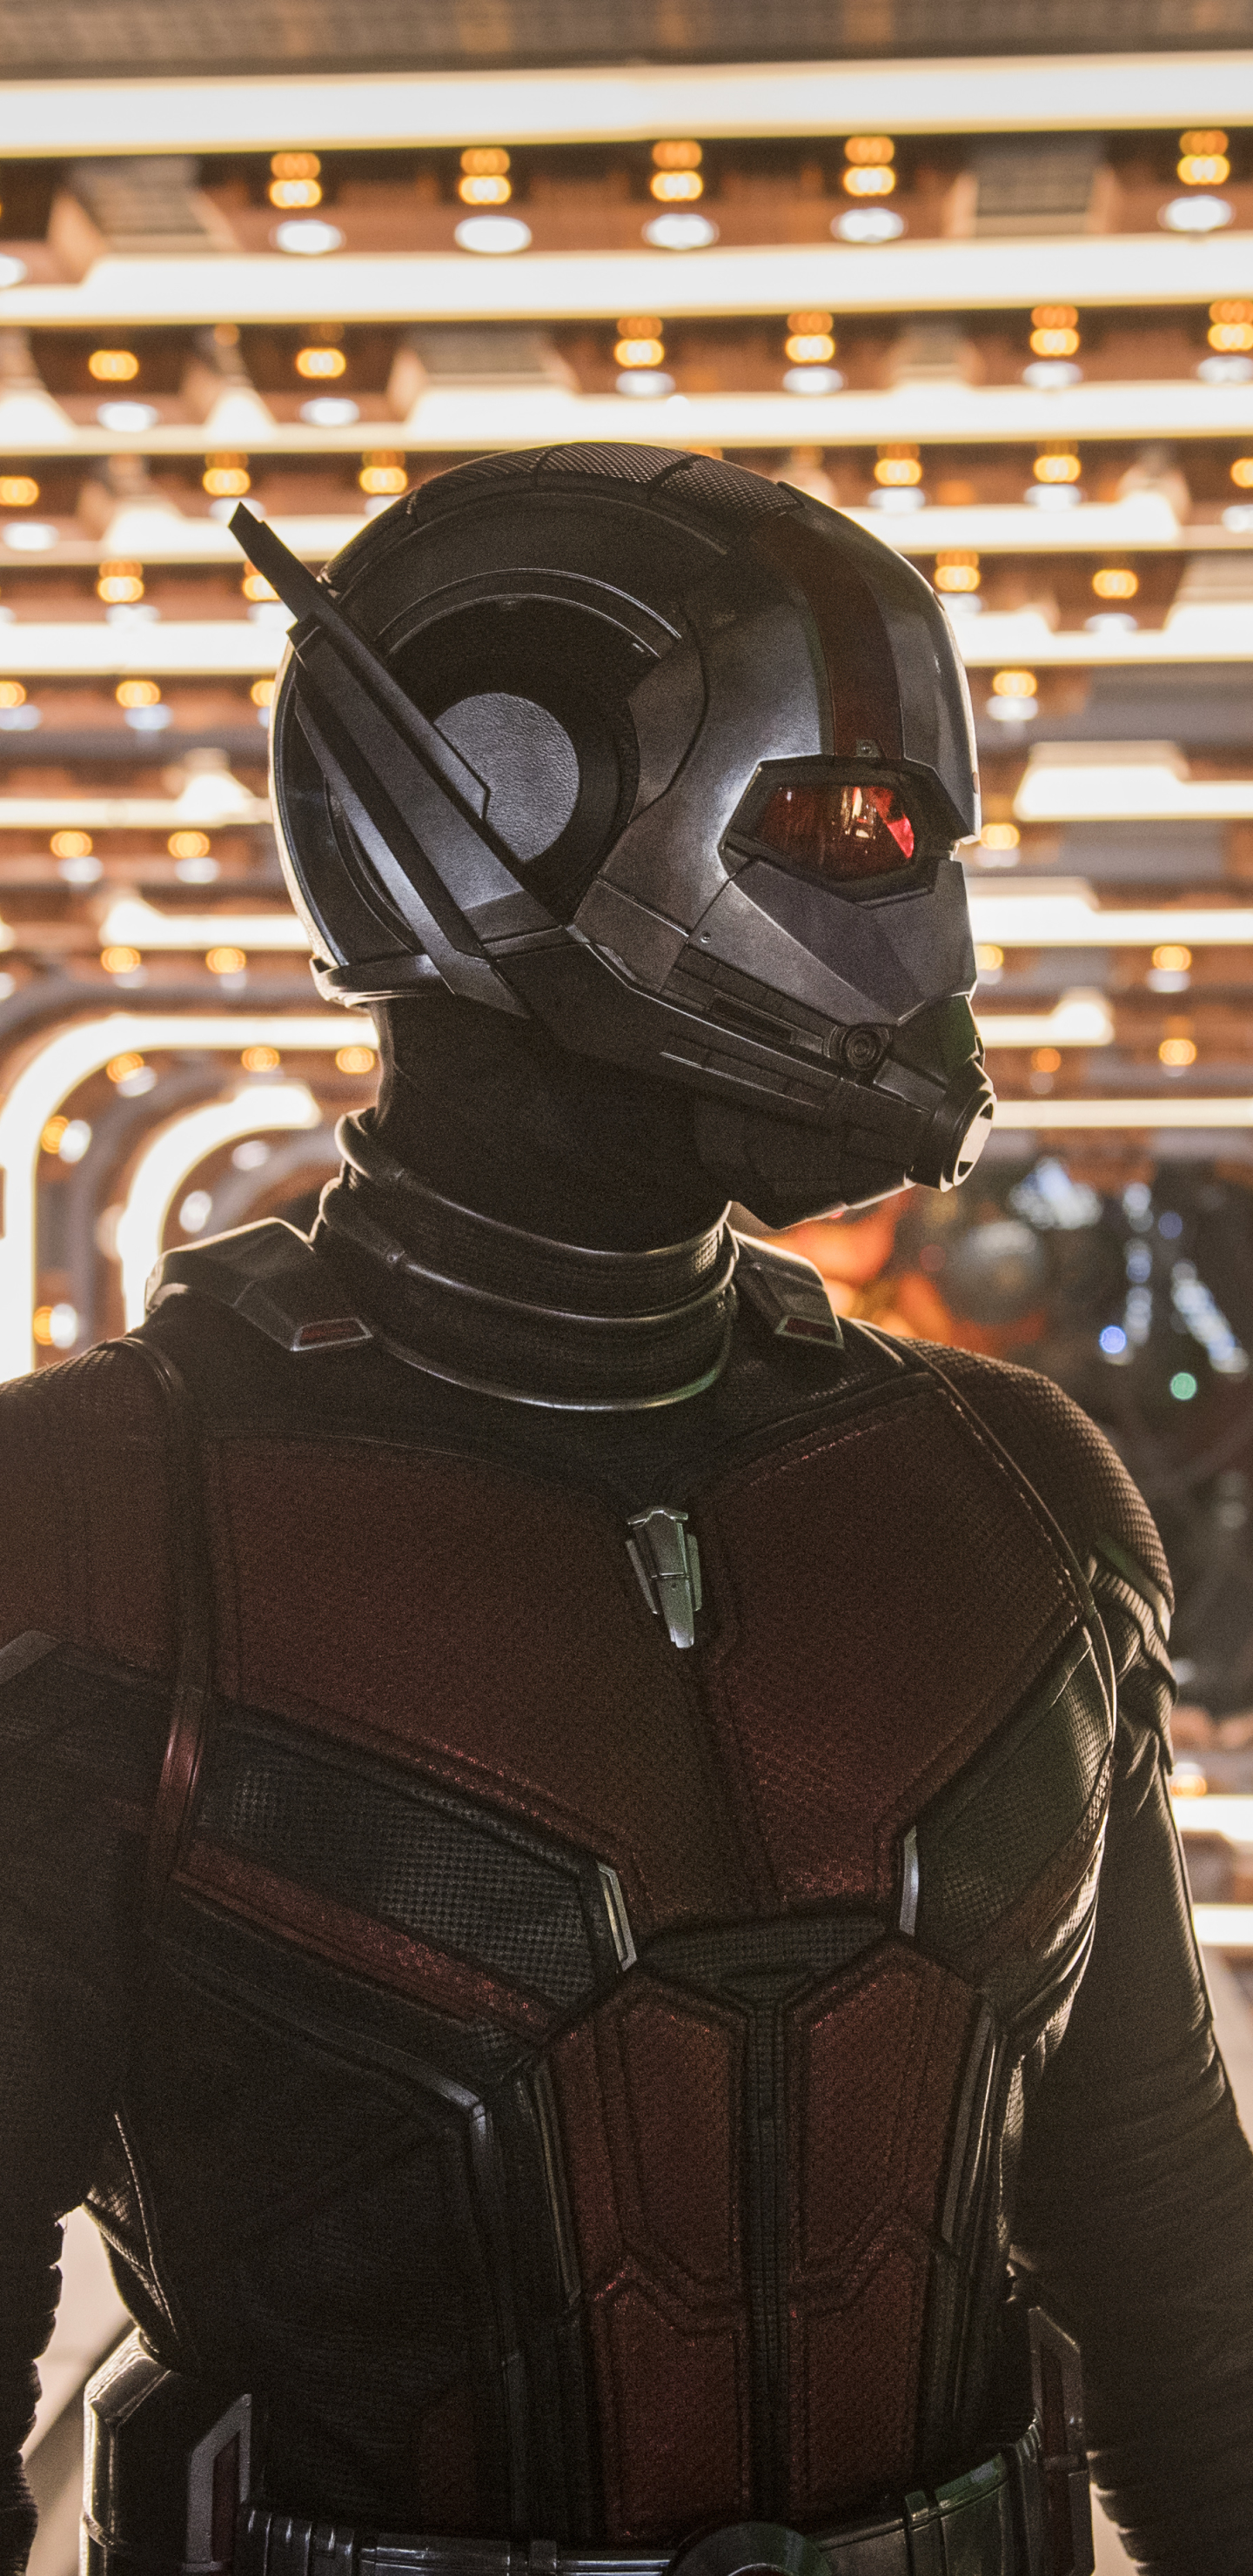  Ant Man And The Wasp HD Android Wallpapers